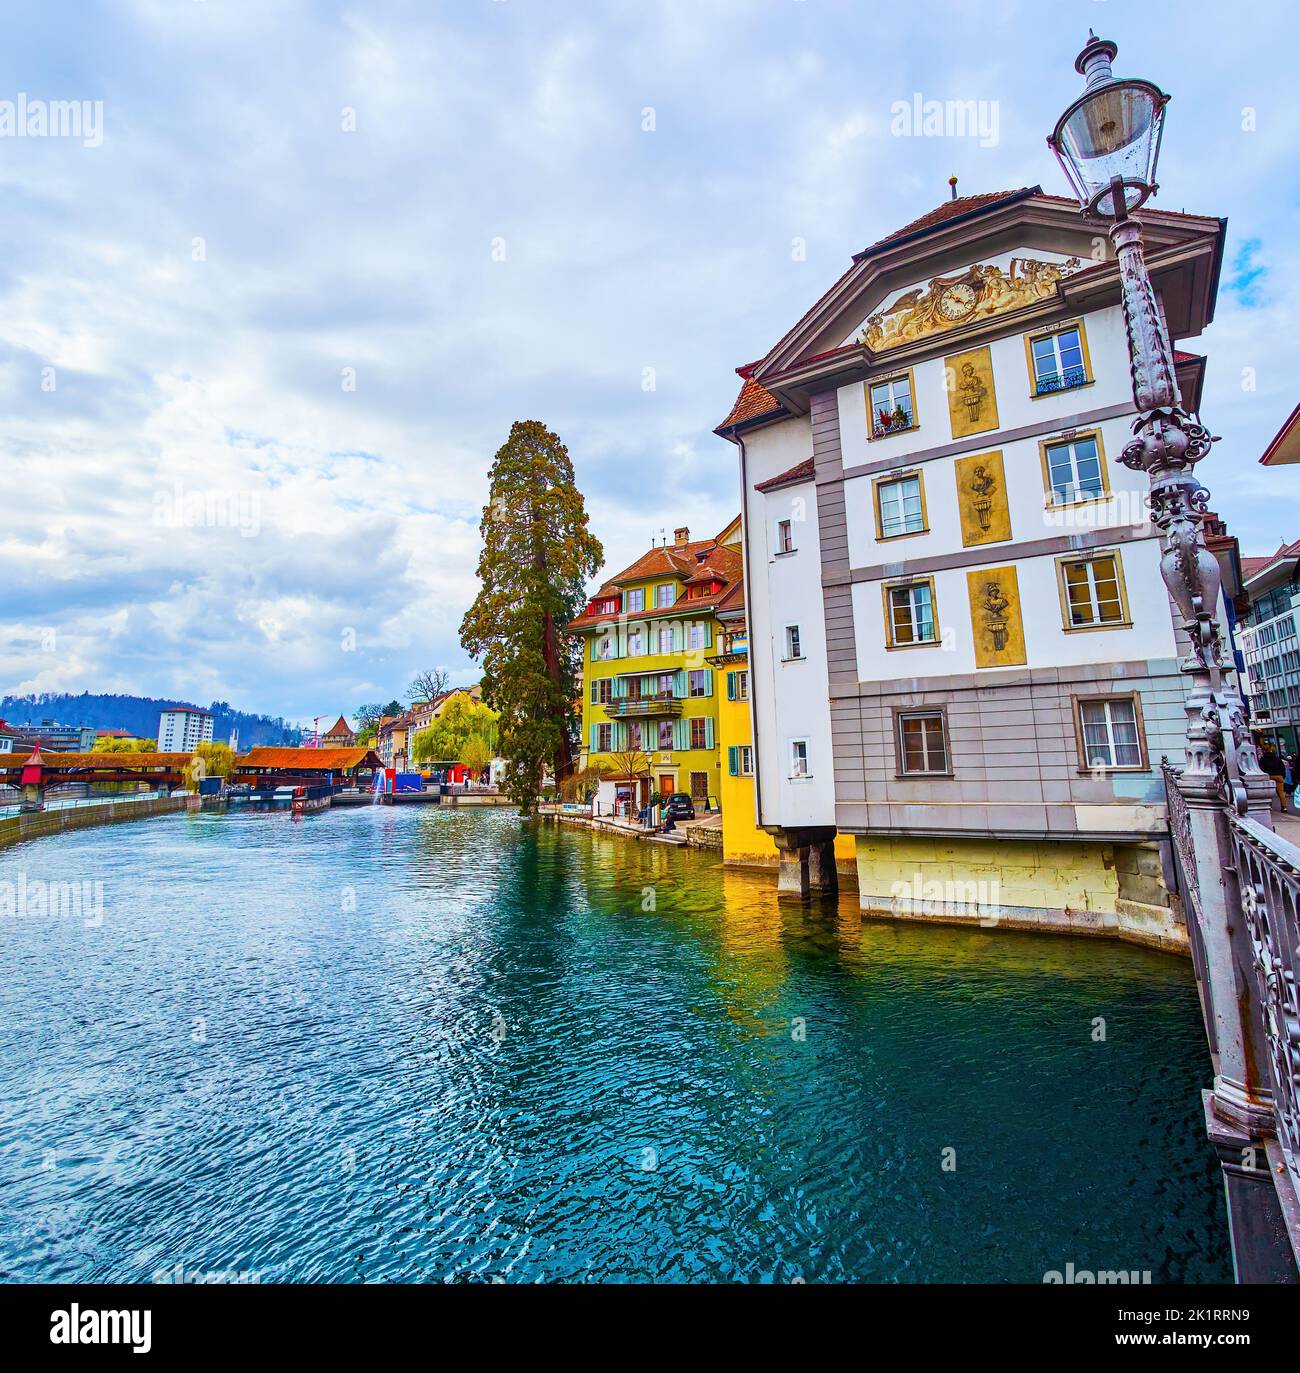 Magnificent medieval houses with wall paintings along Reuss river in old town in Lucerne, Switzerland Stock Photo